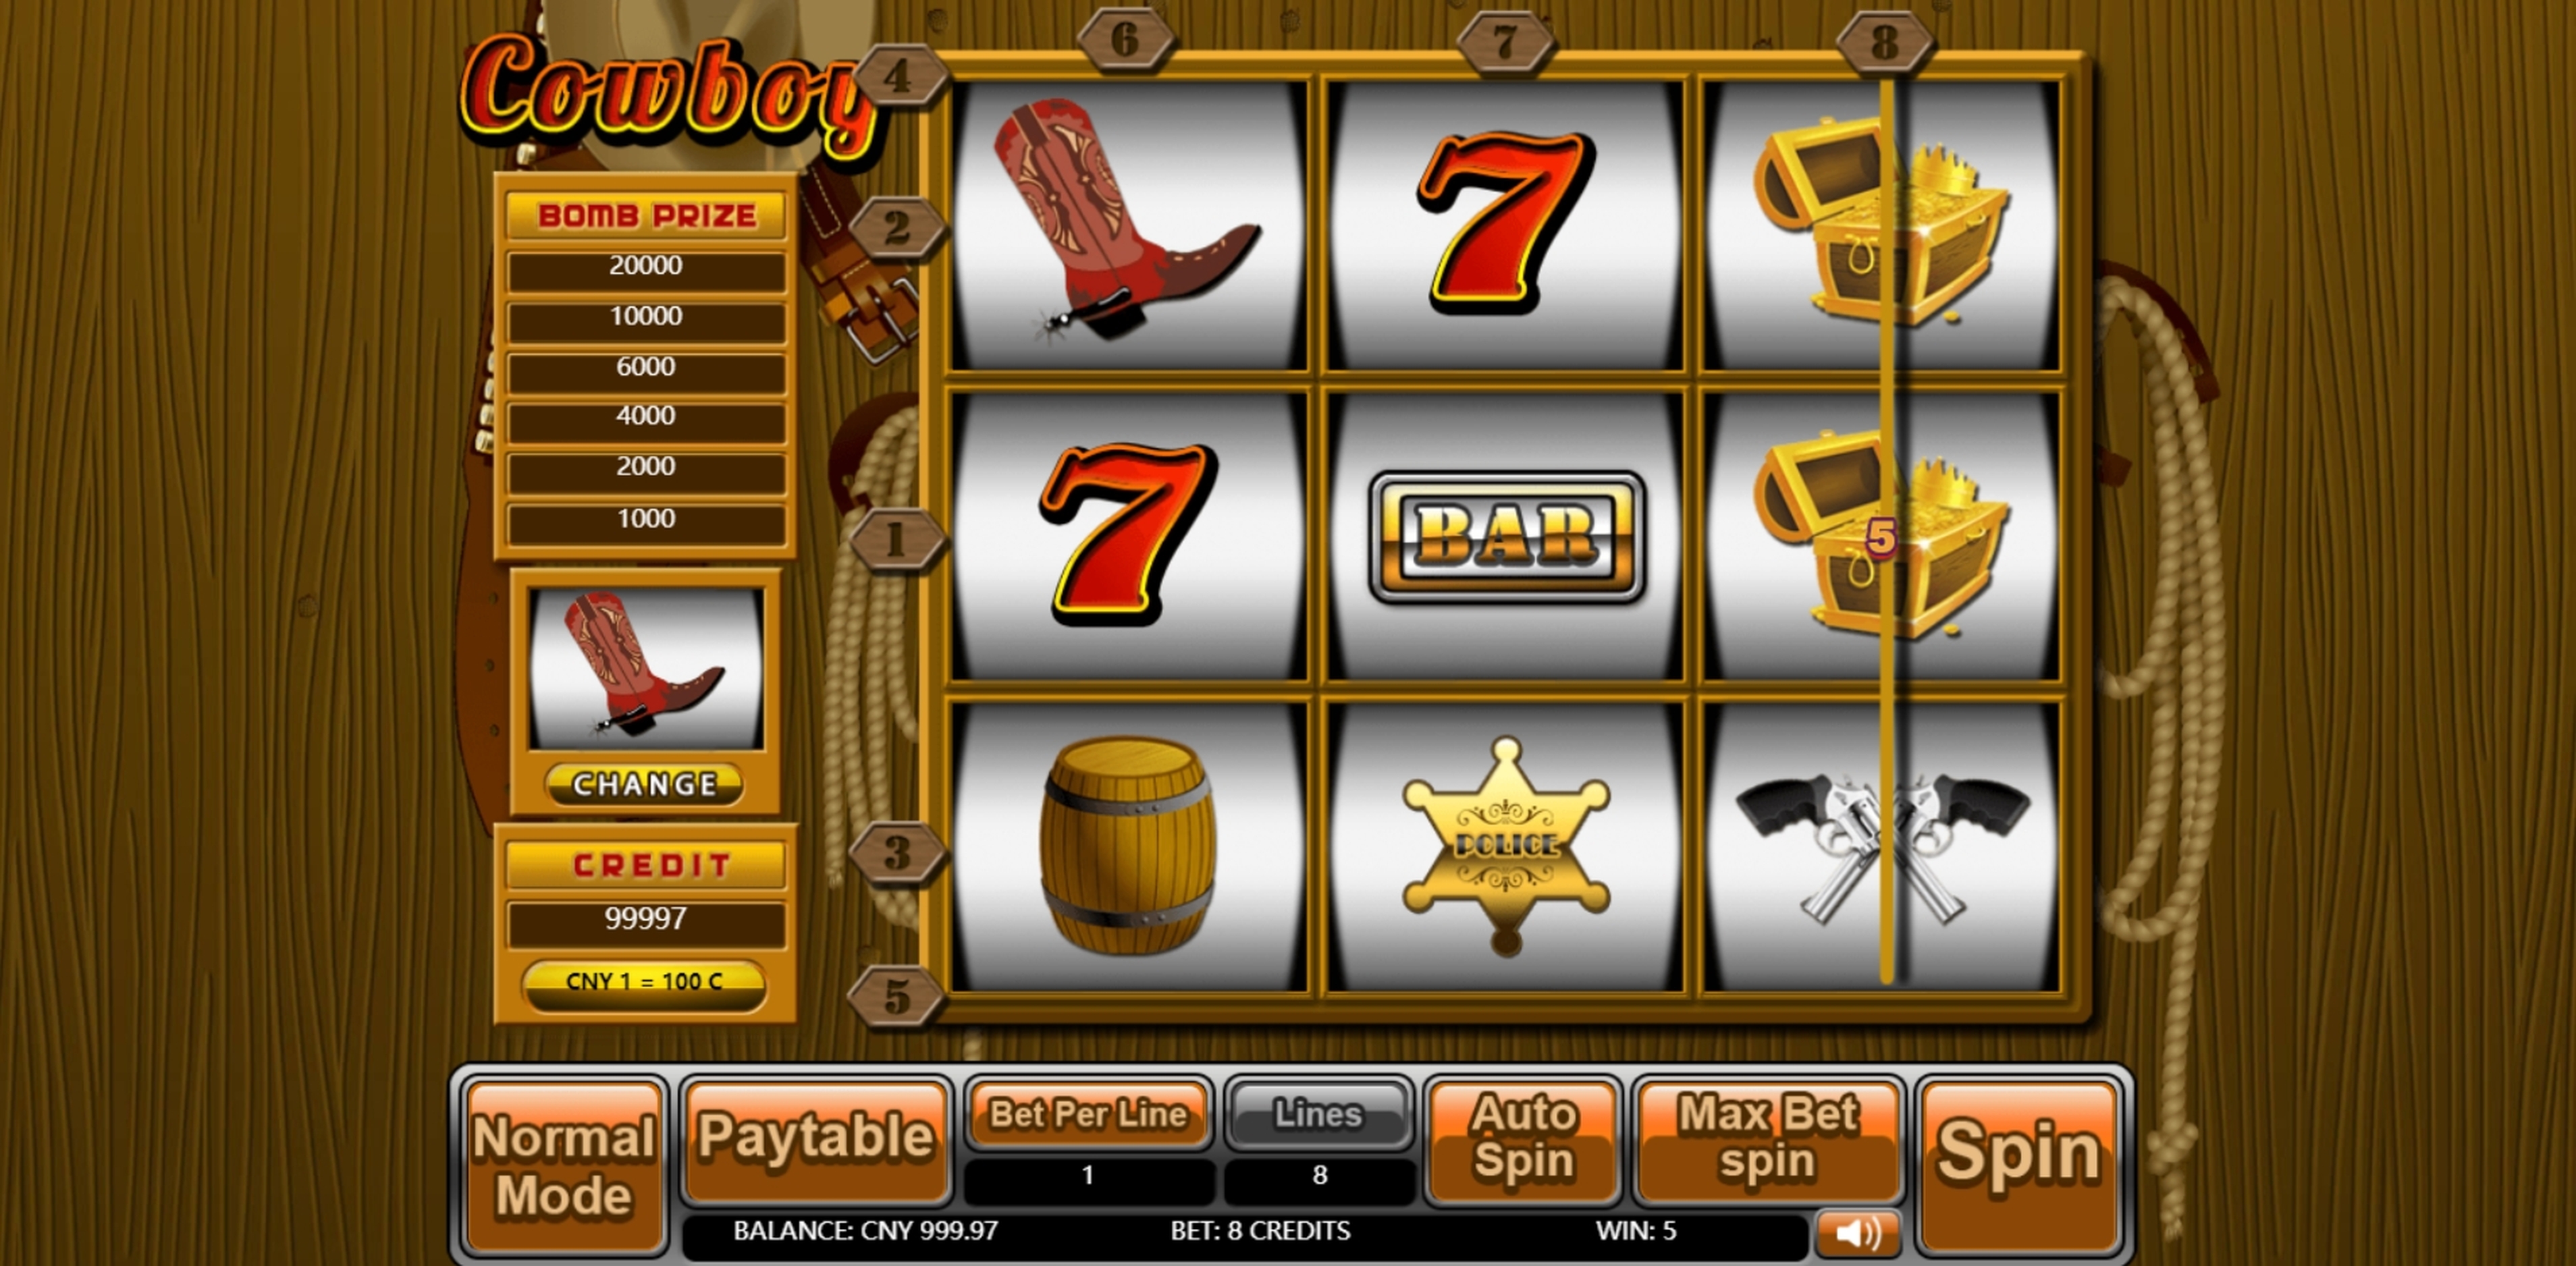 Win Money in Cowboy Free Slot Game by Aiwin Games